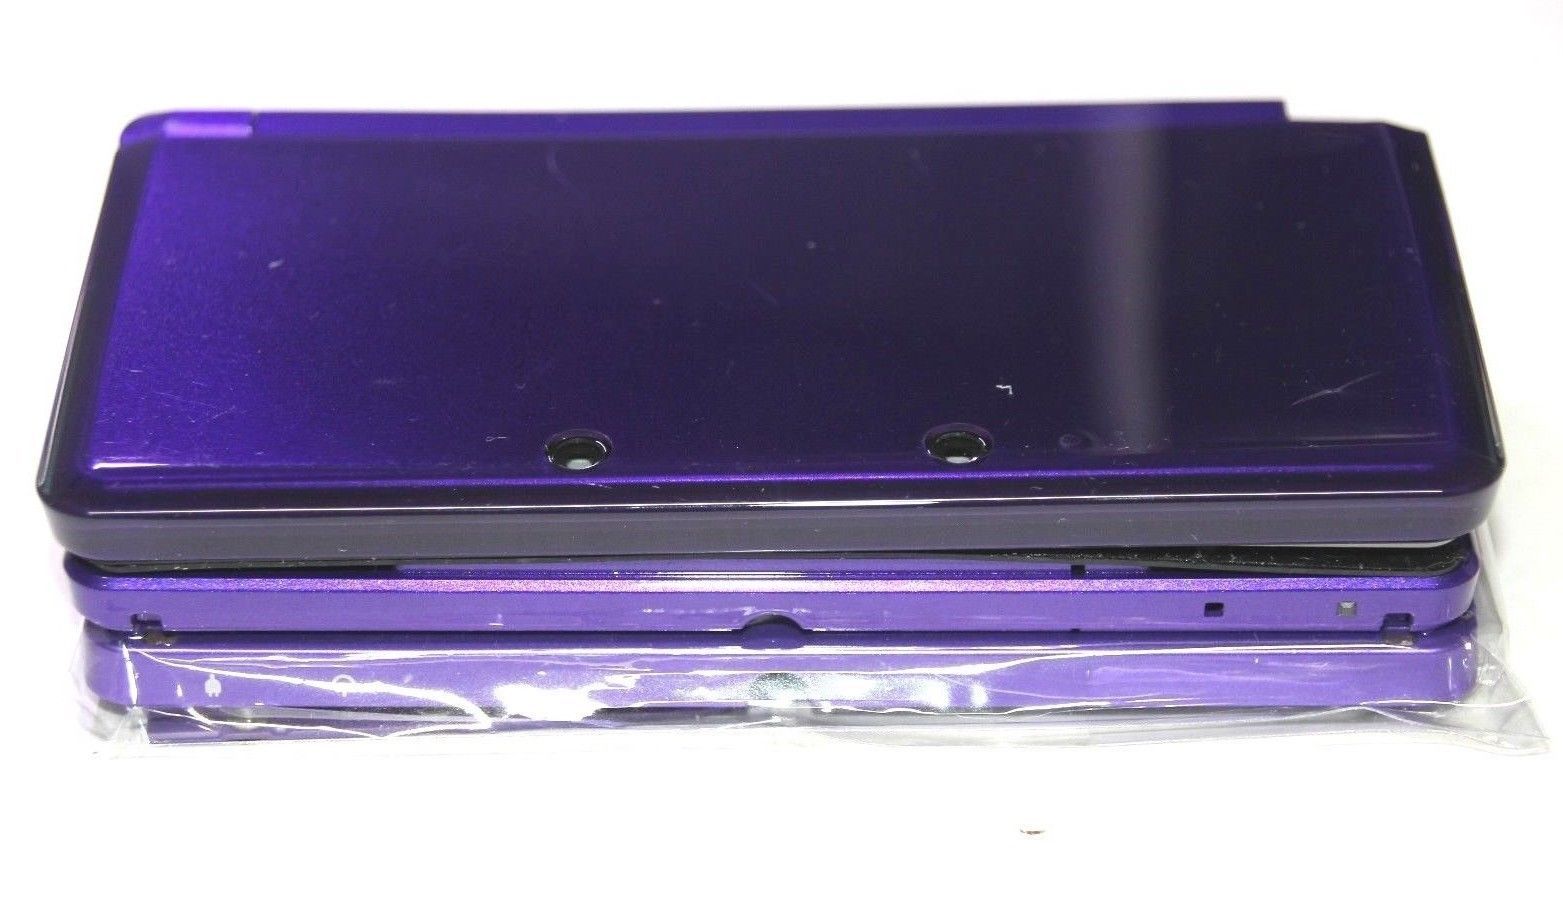 Original Oem Nintendo 3ds Case Replacement Full Housing Purple Shell 3 Popular For Sale